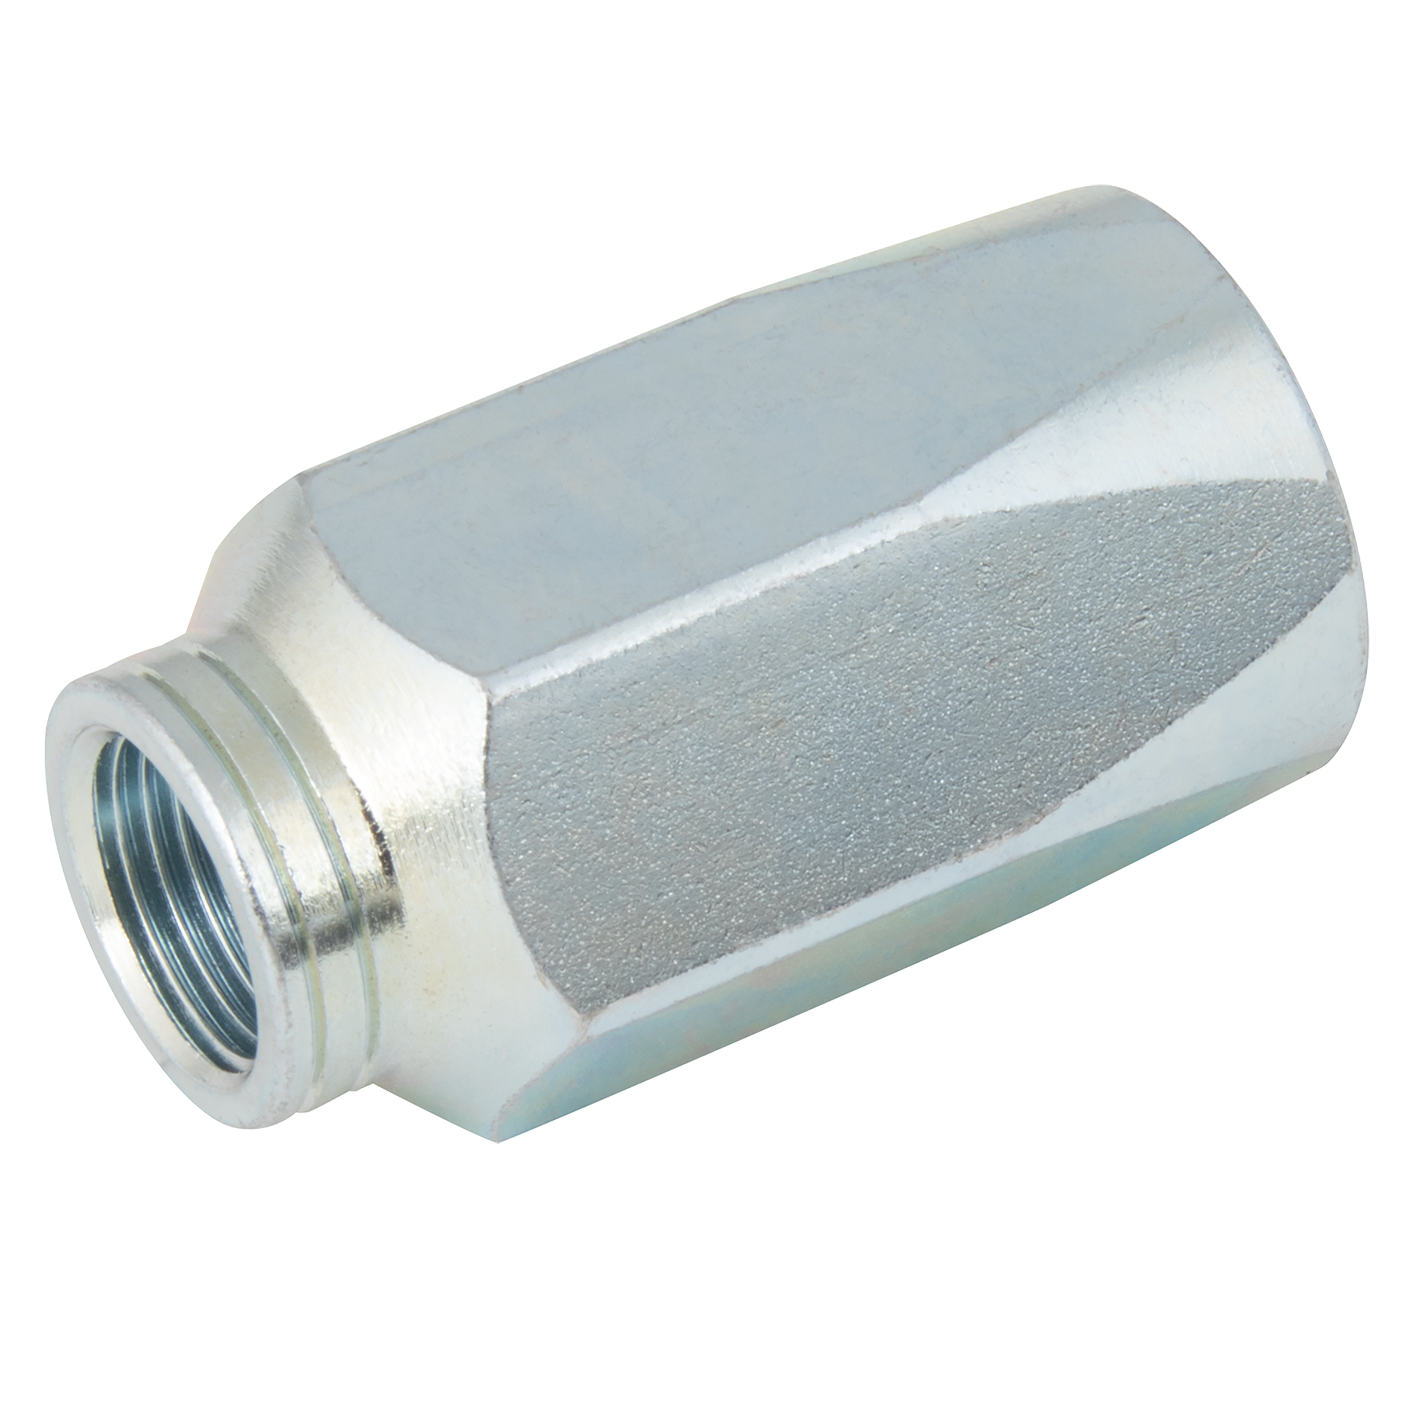 Hydraulic Reusable Ferrule R2AT Non-skive Hose ID 3/4"